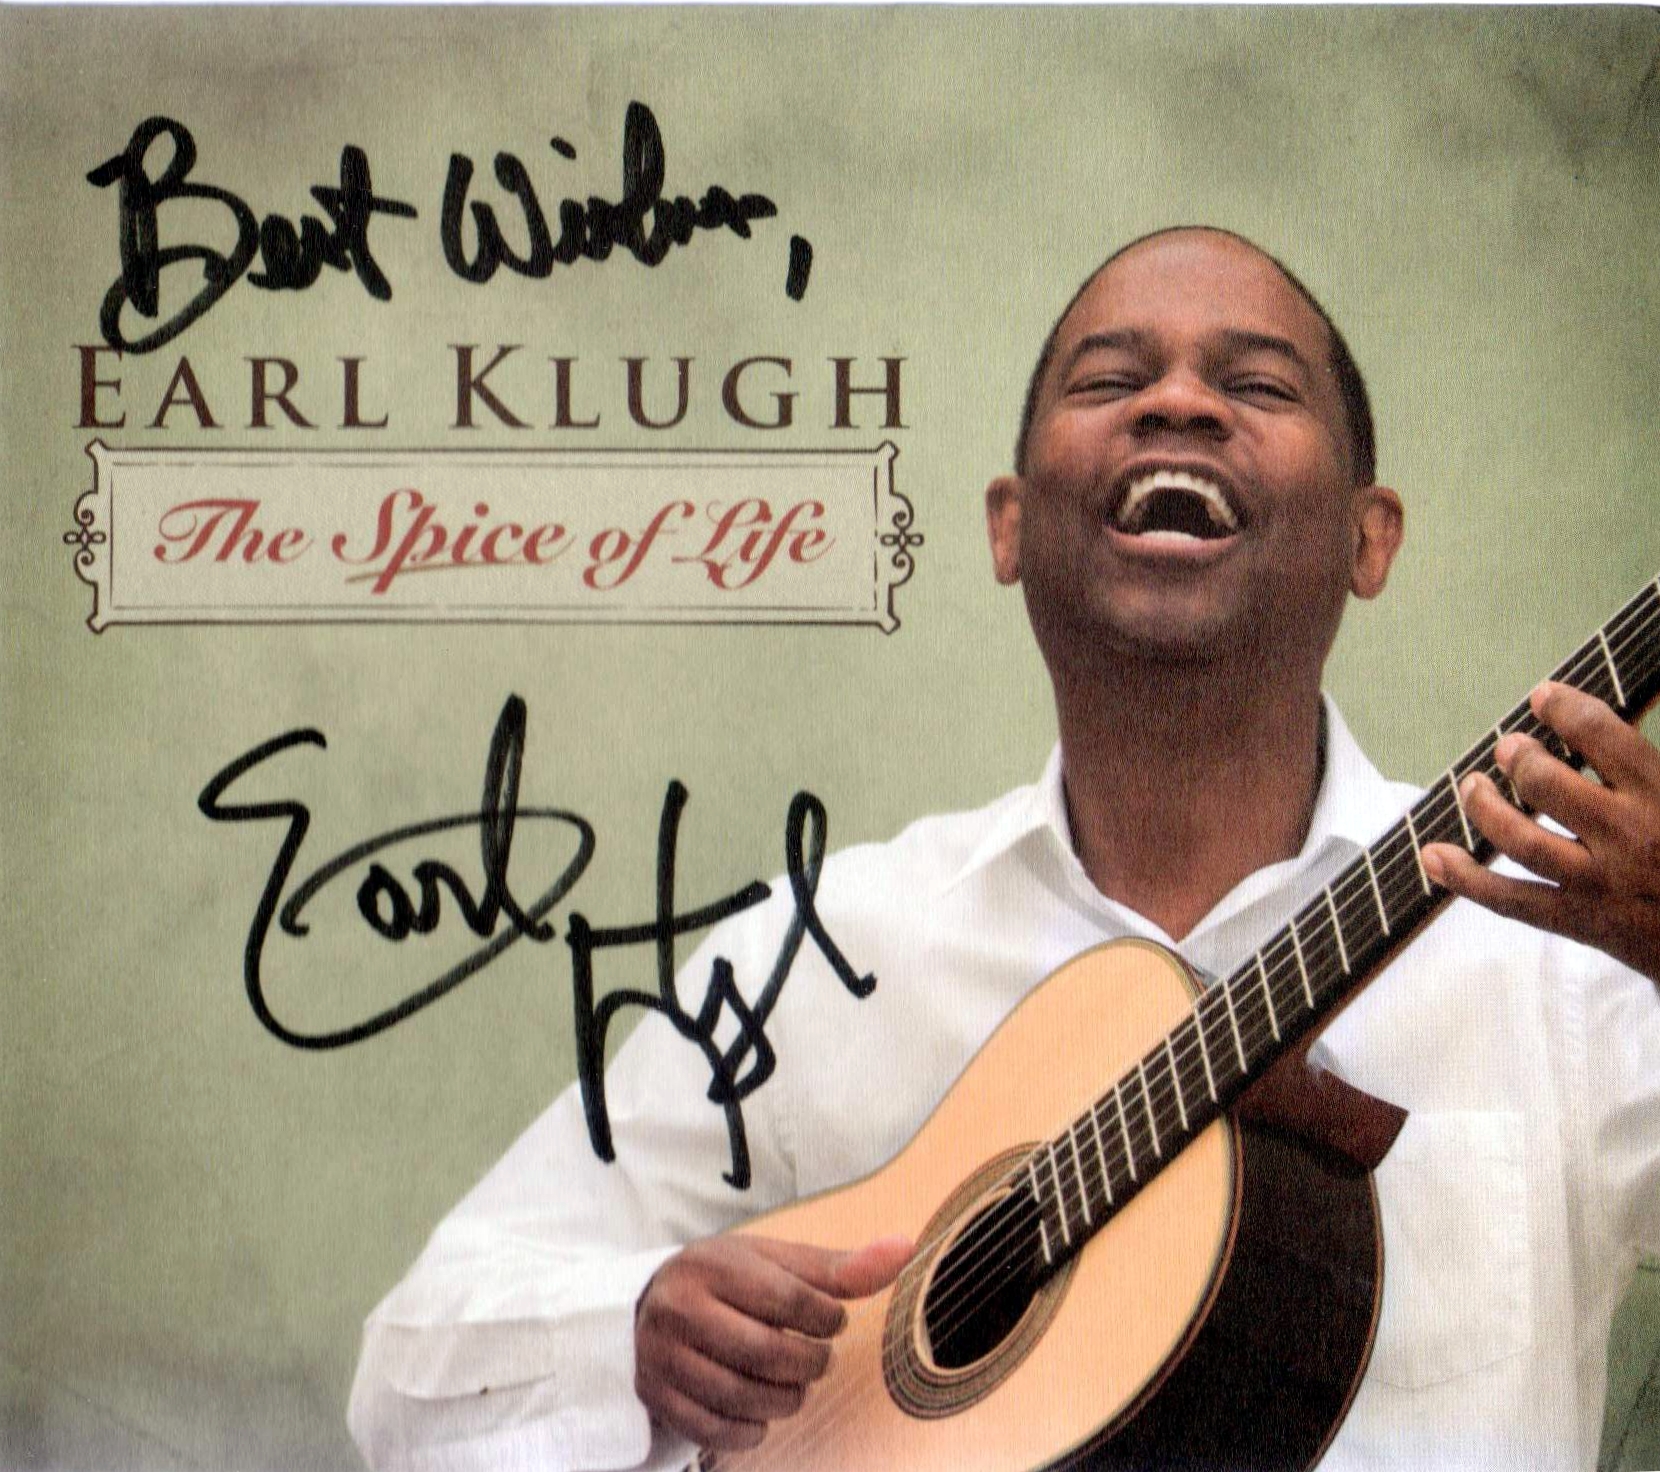 Earl Klugh The Spice of Life CD (Koch Records 2005)